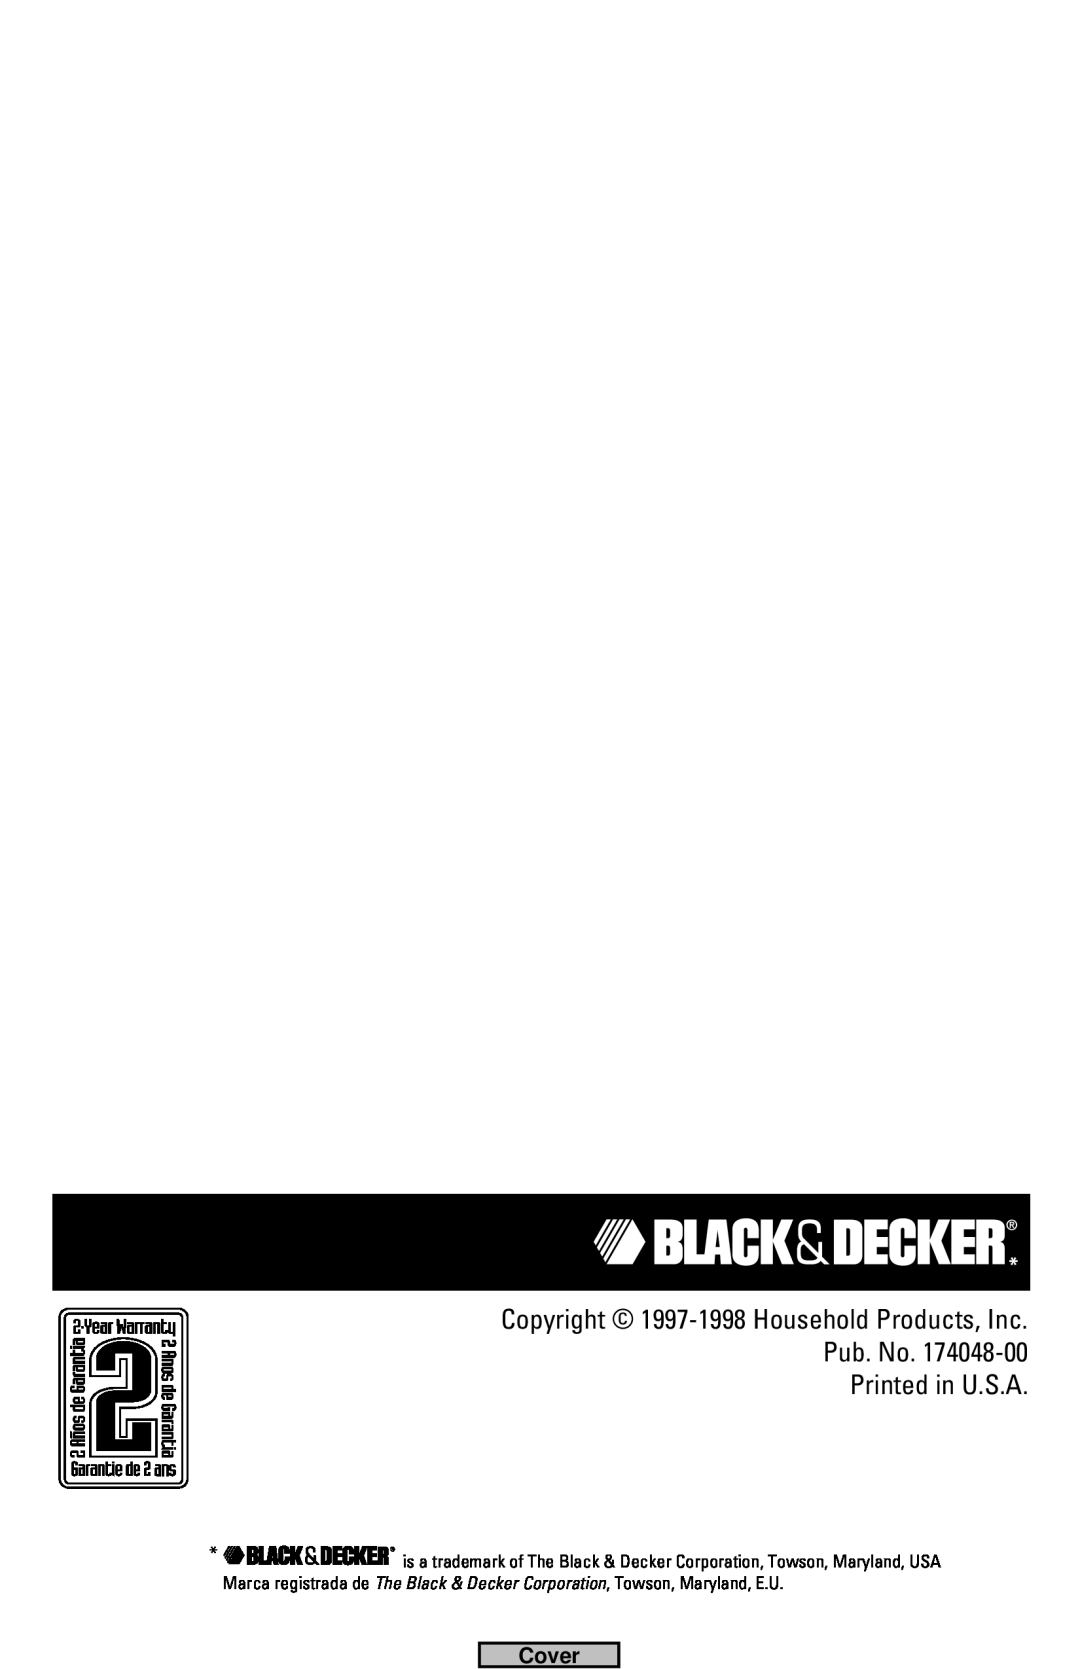 Black & Decker TRO220, TRO520 manual Copyright 1997-1998 Household Products, Inc Pub. No Printed in U.S.A, Cover 